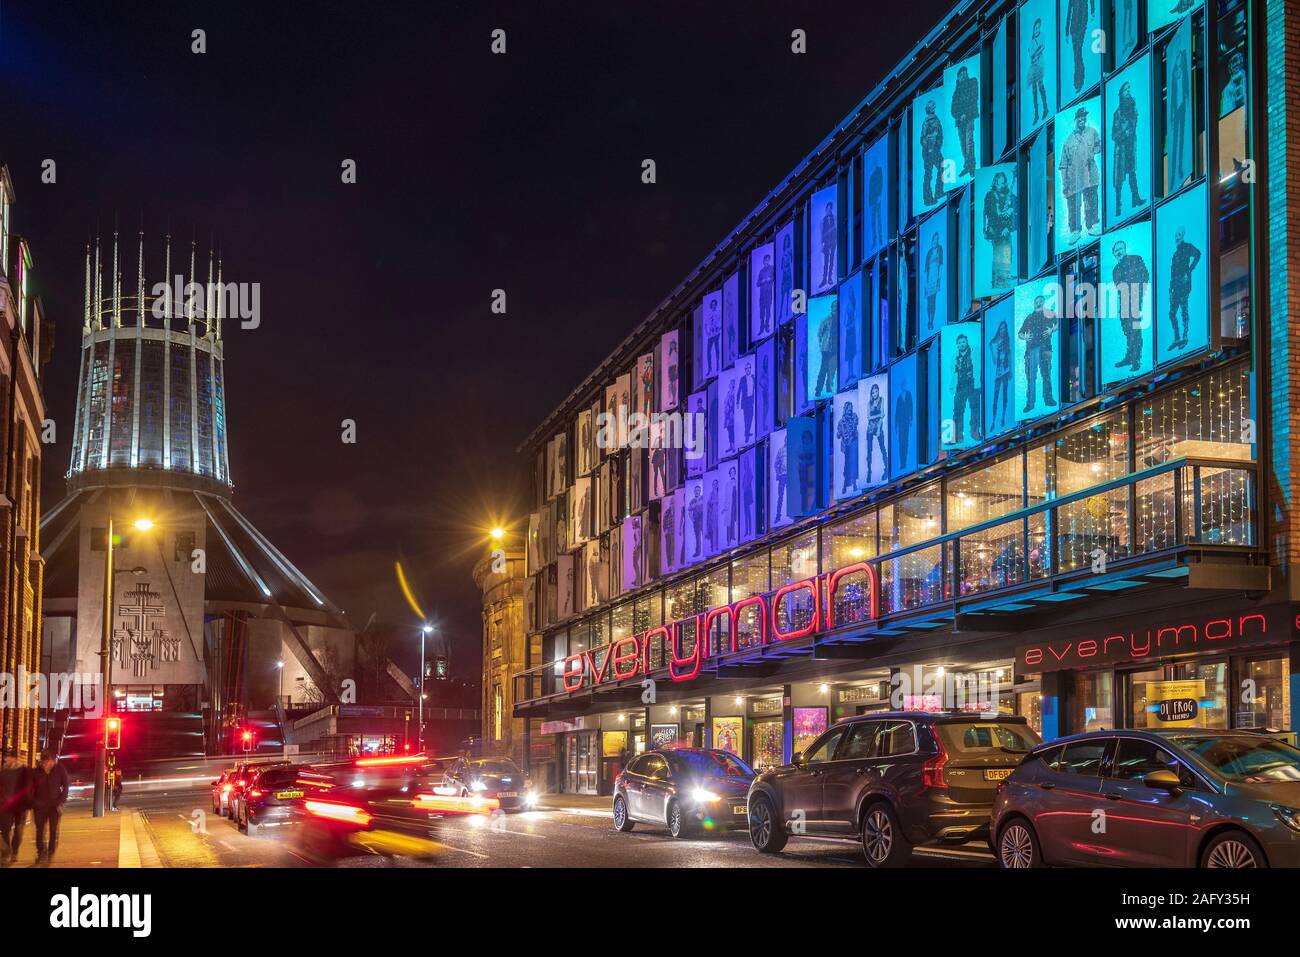 Liverpool Metropolitan cathedral and Everyman theatre on Hope Street at night. Stock Photo